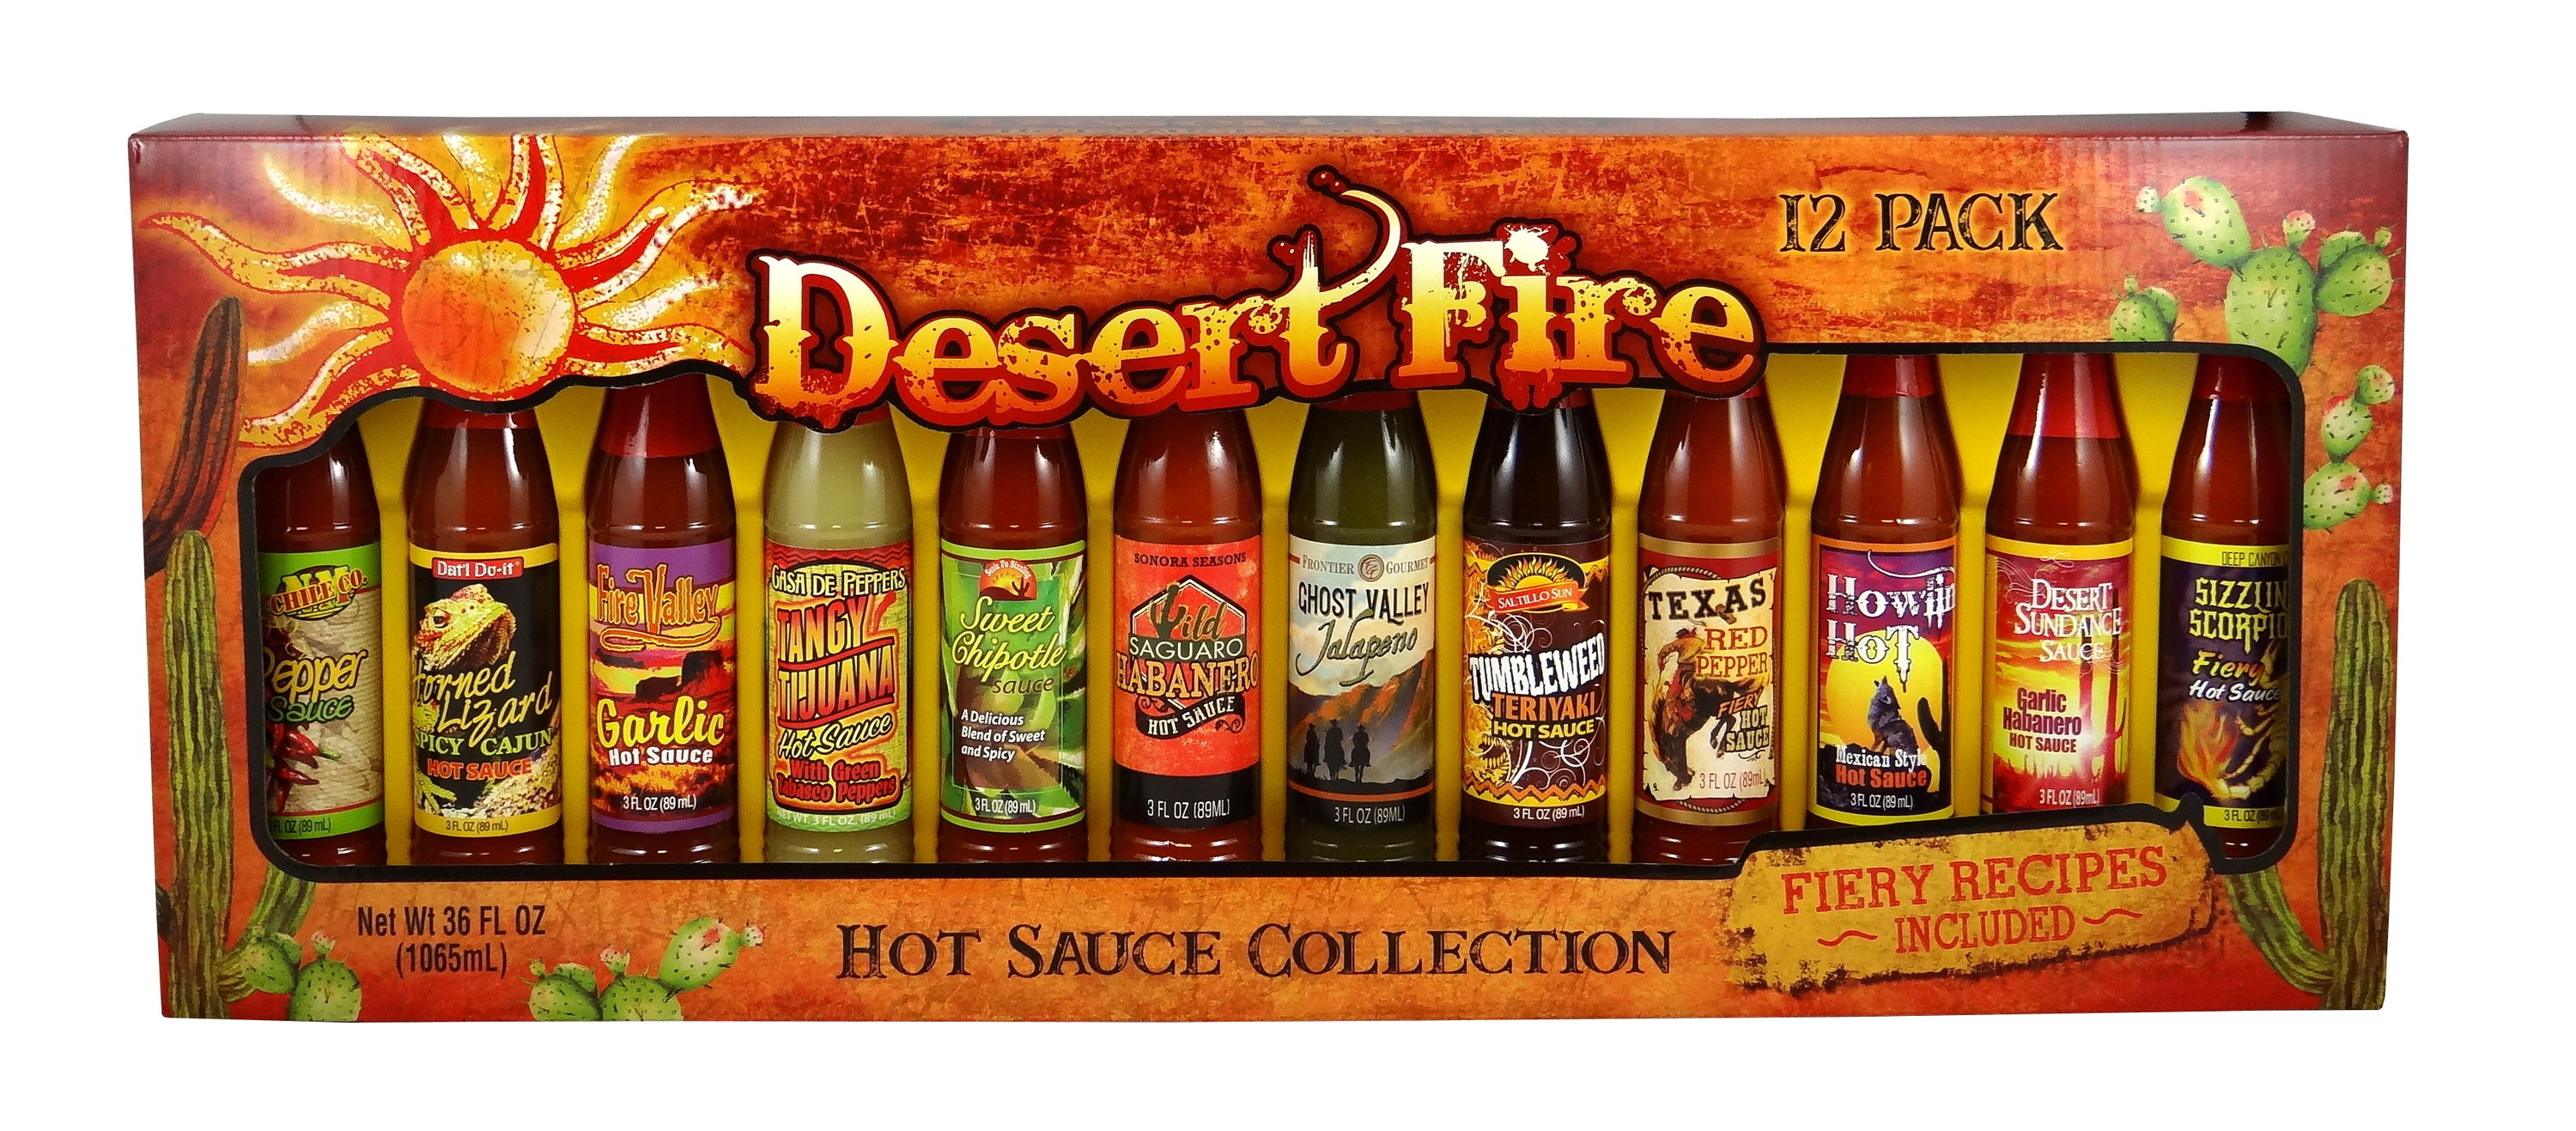 hot sauce kit with 12 different hot sauce flavors